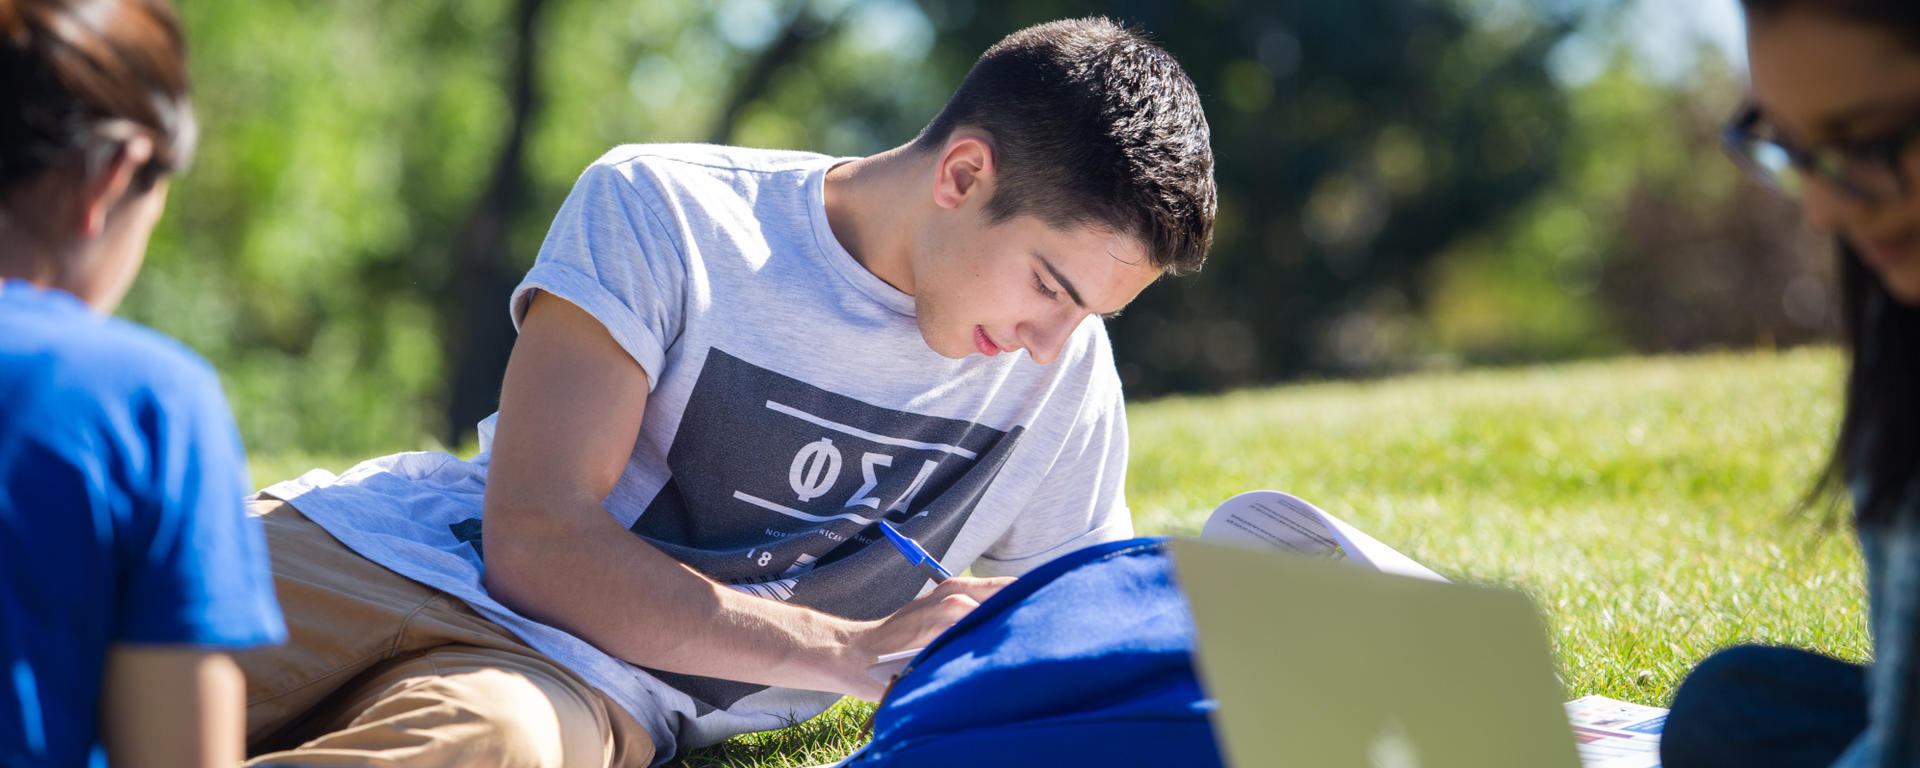 Three (presumably) students sit on green grass. There is a woman on the left in a blue shirt with her back to the camera, a young man with brown hair laying as he looks down at his book with pen in hand, and a woman wearing glasses on the right side of the screen looking down at her laptop